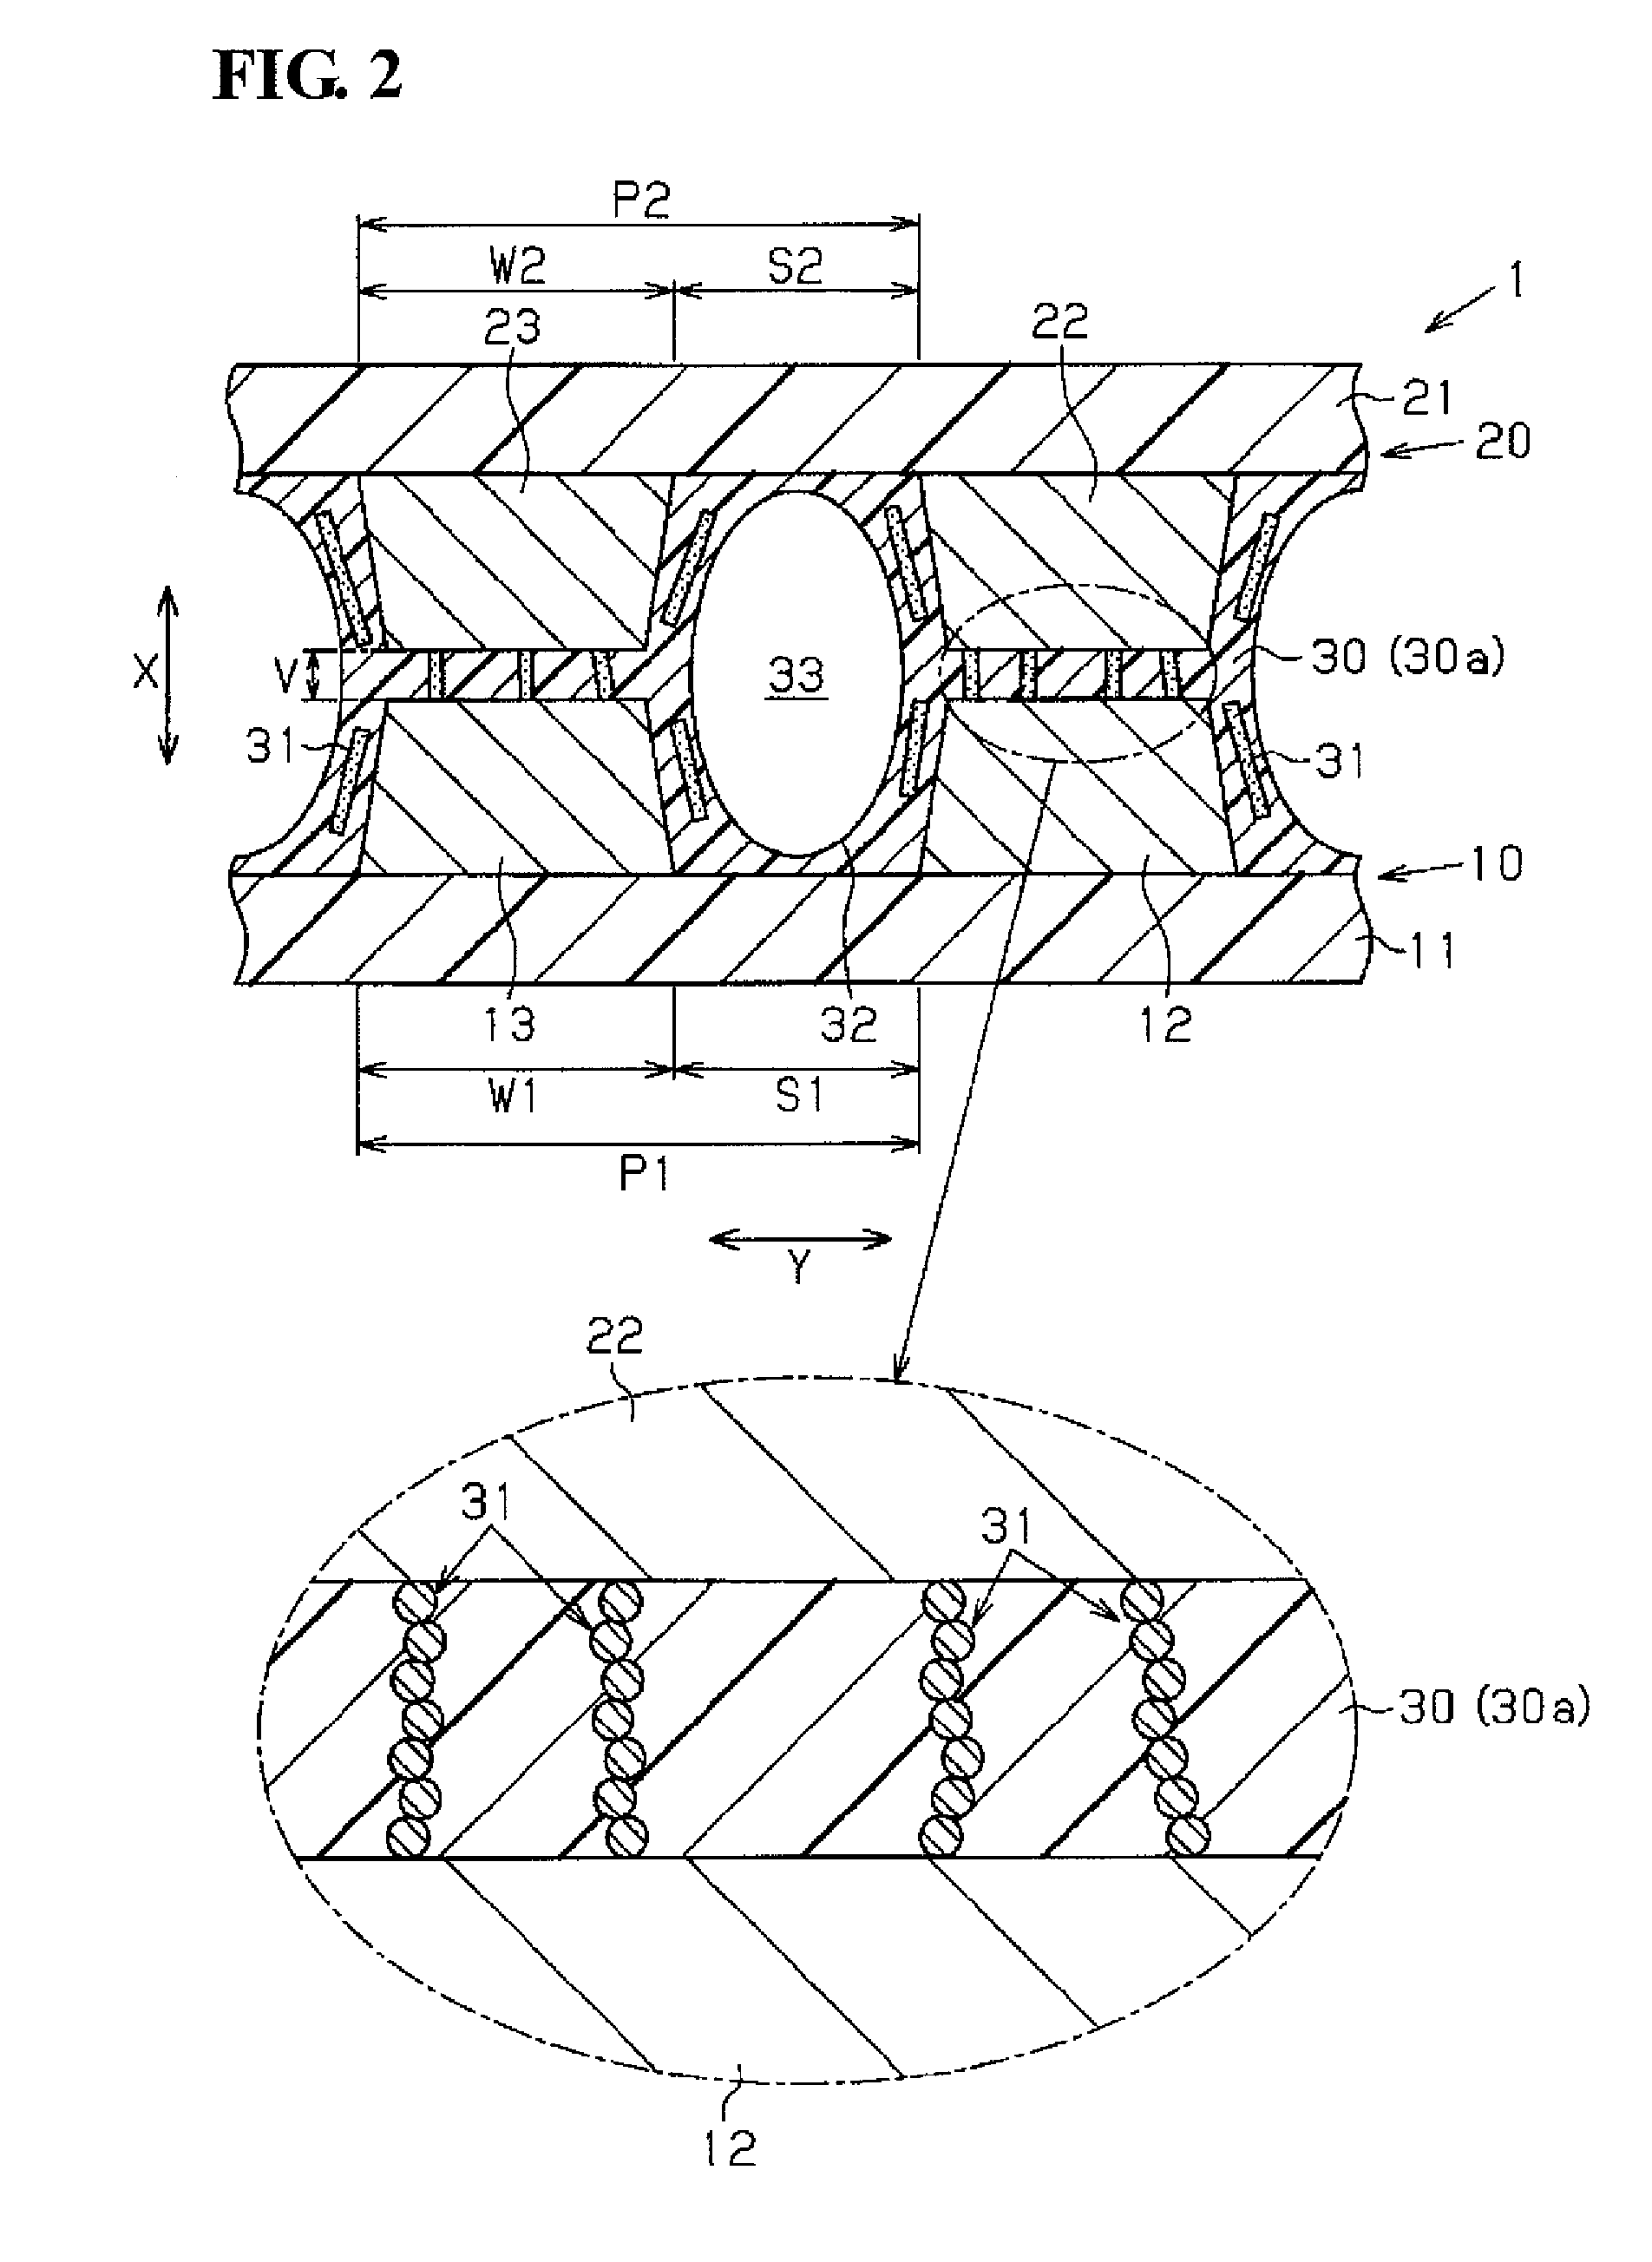 Structure of connecting printed wiring boards, method of connecting printed wiring boards, and adhesive having anisotropic conductivity